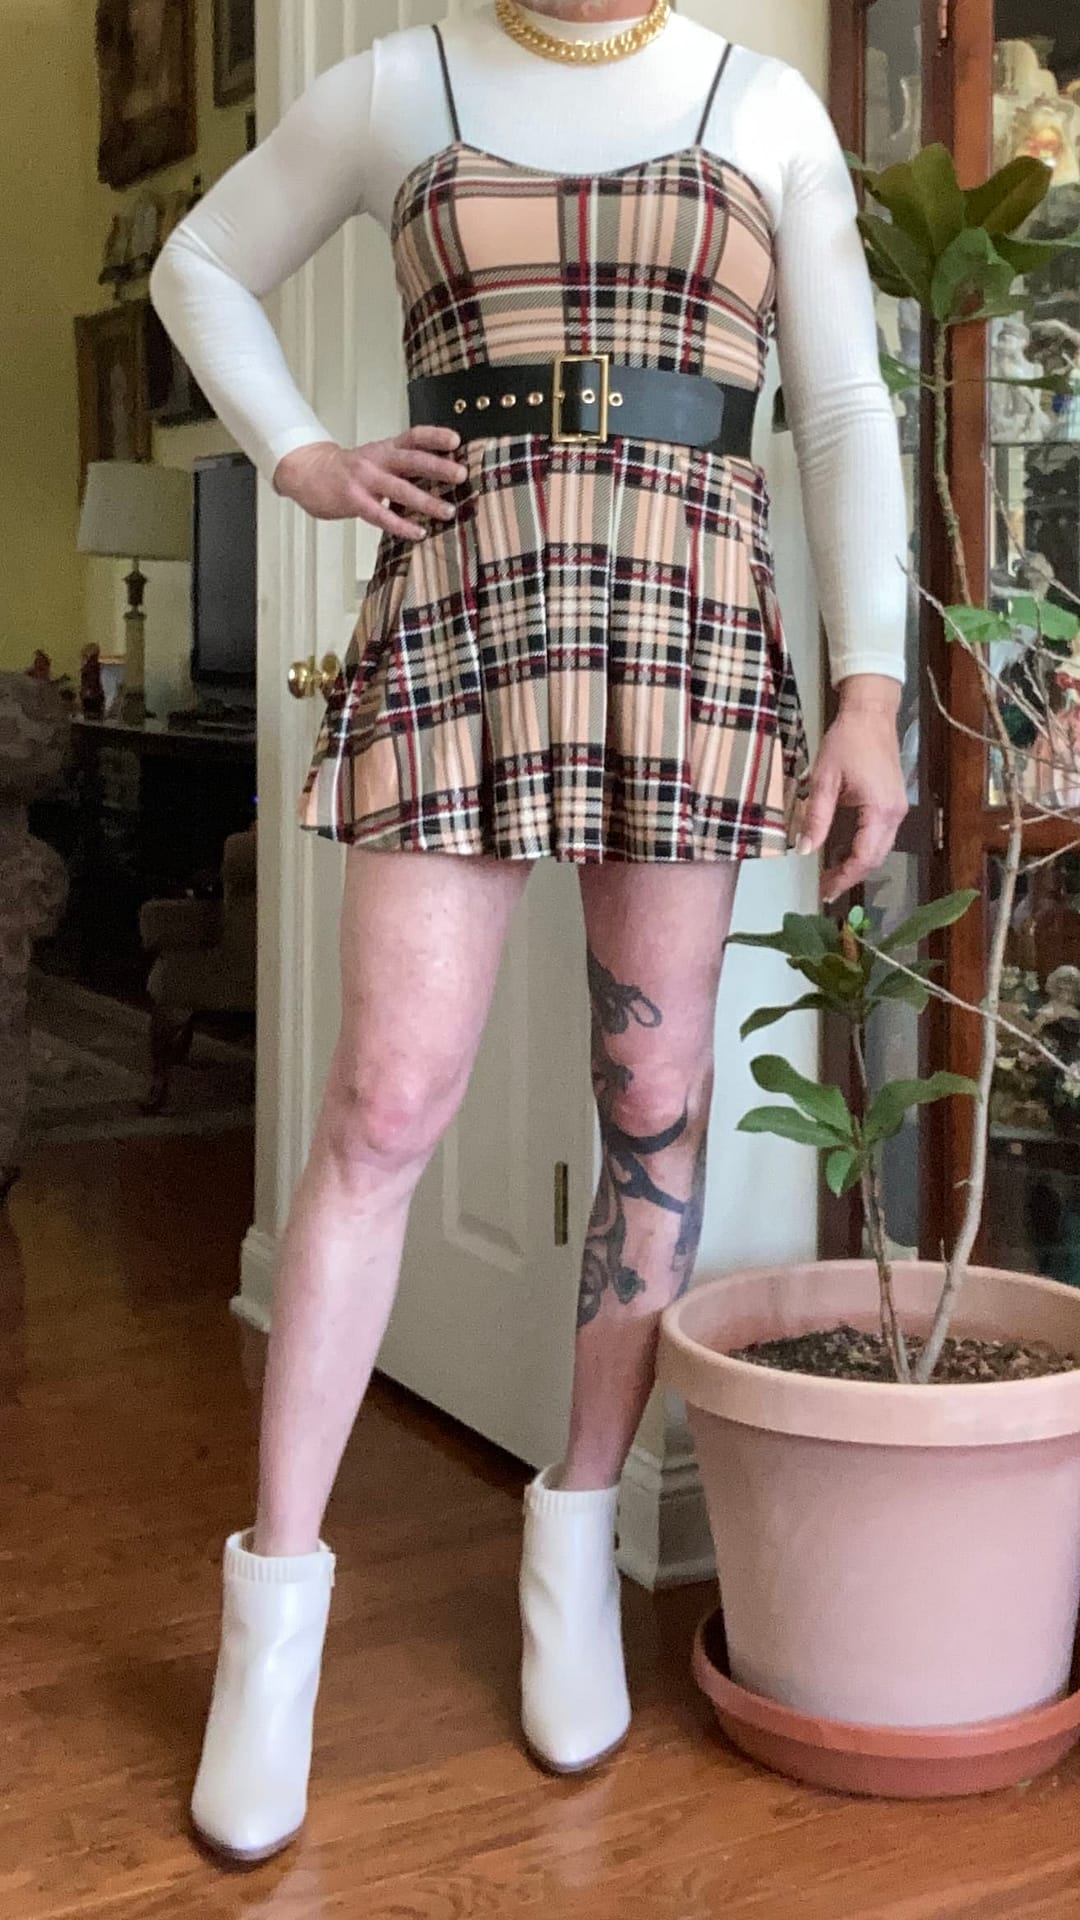 Today’s New Outfit – Crossdresser Heaven